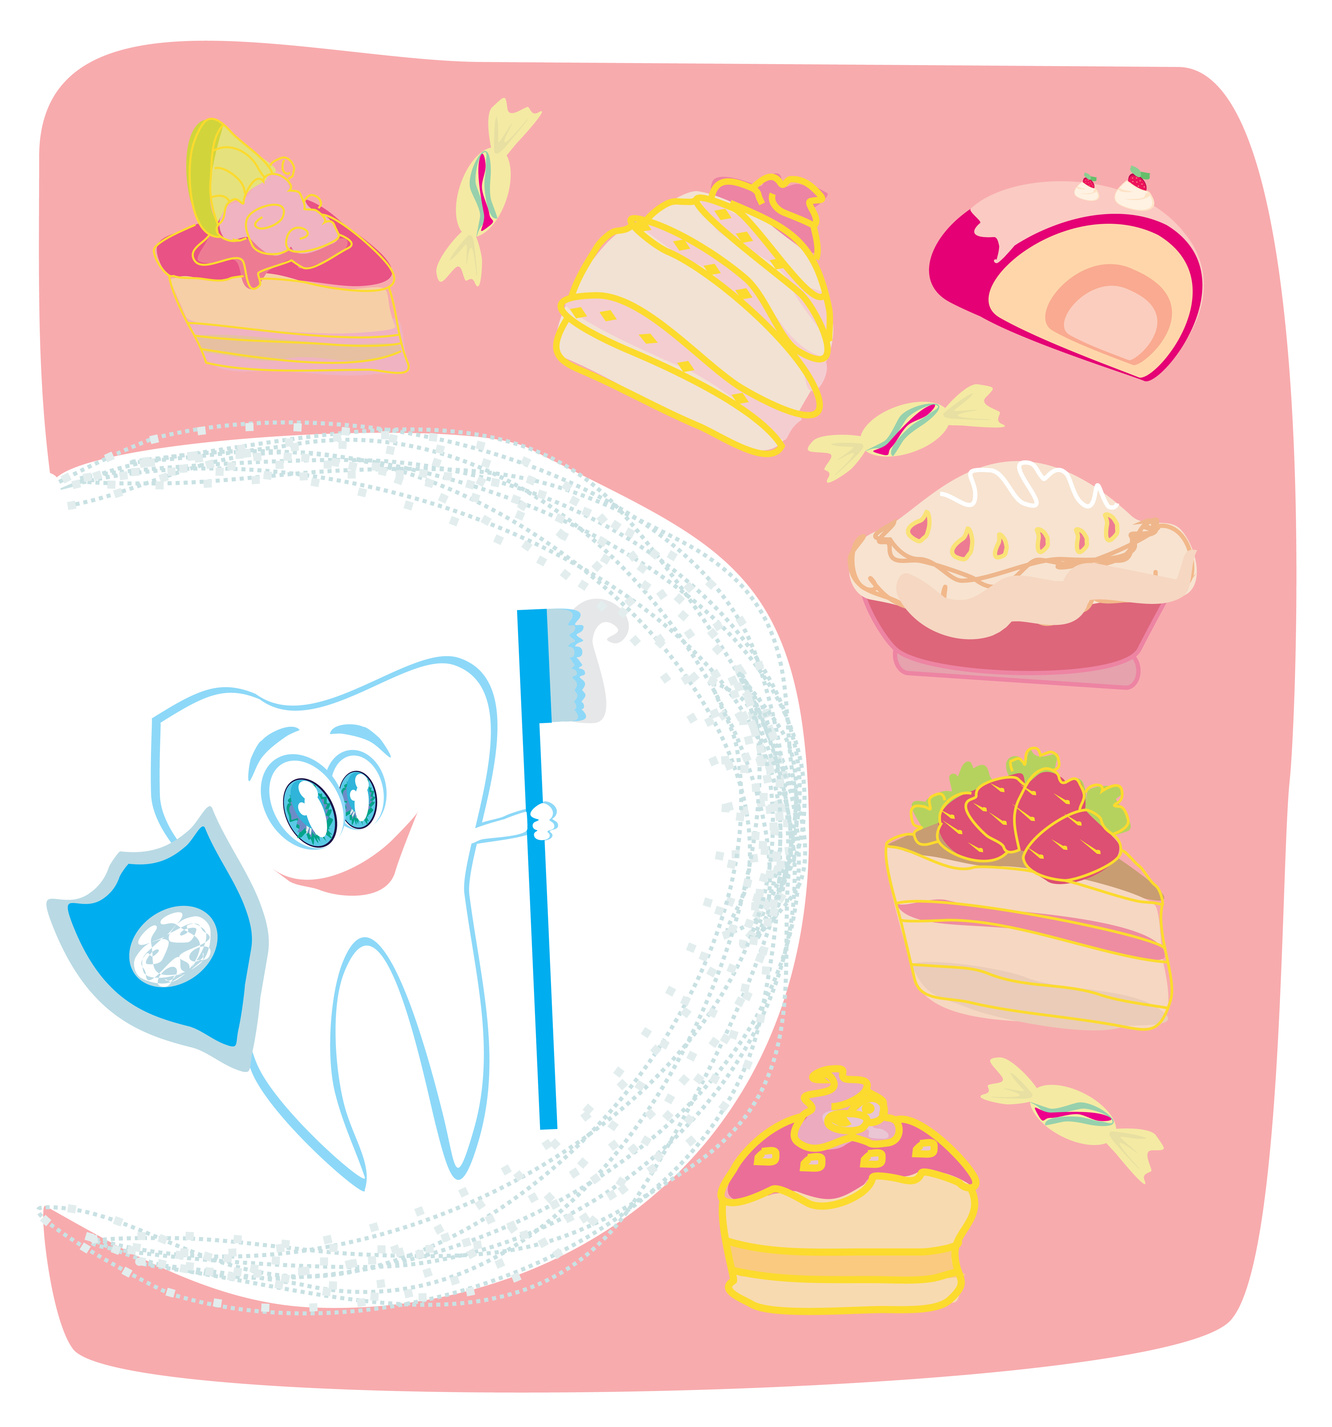 A Funny Teeth Care Poster